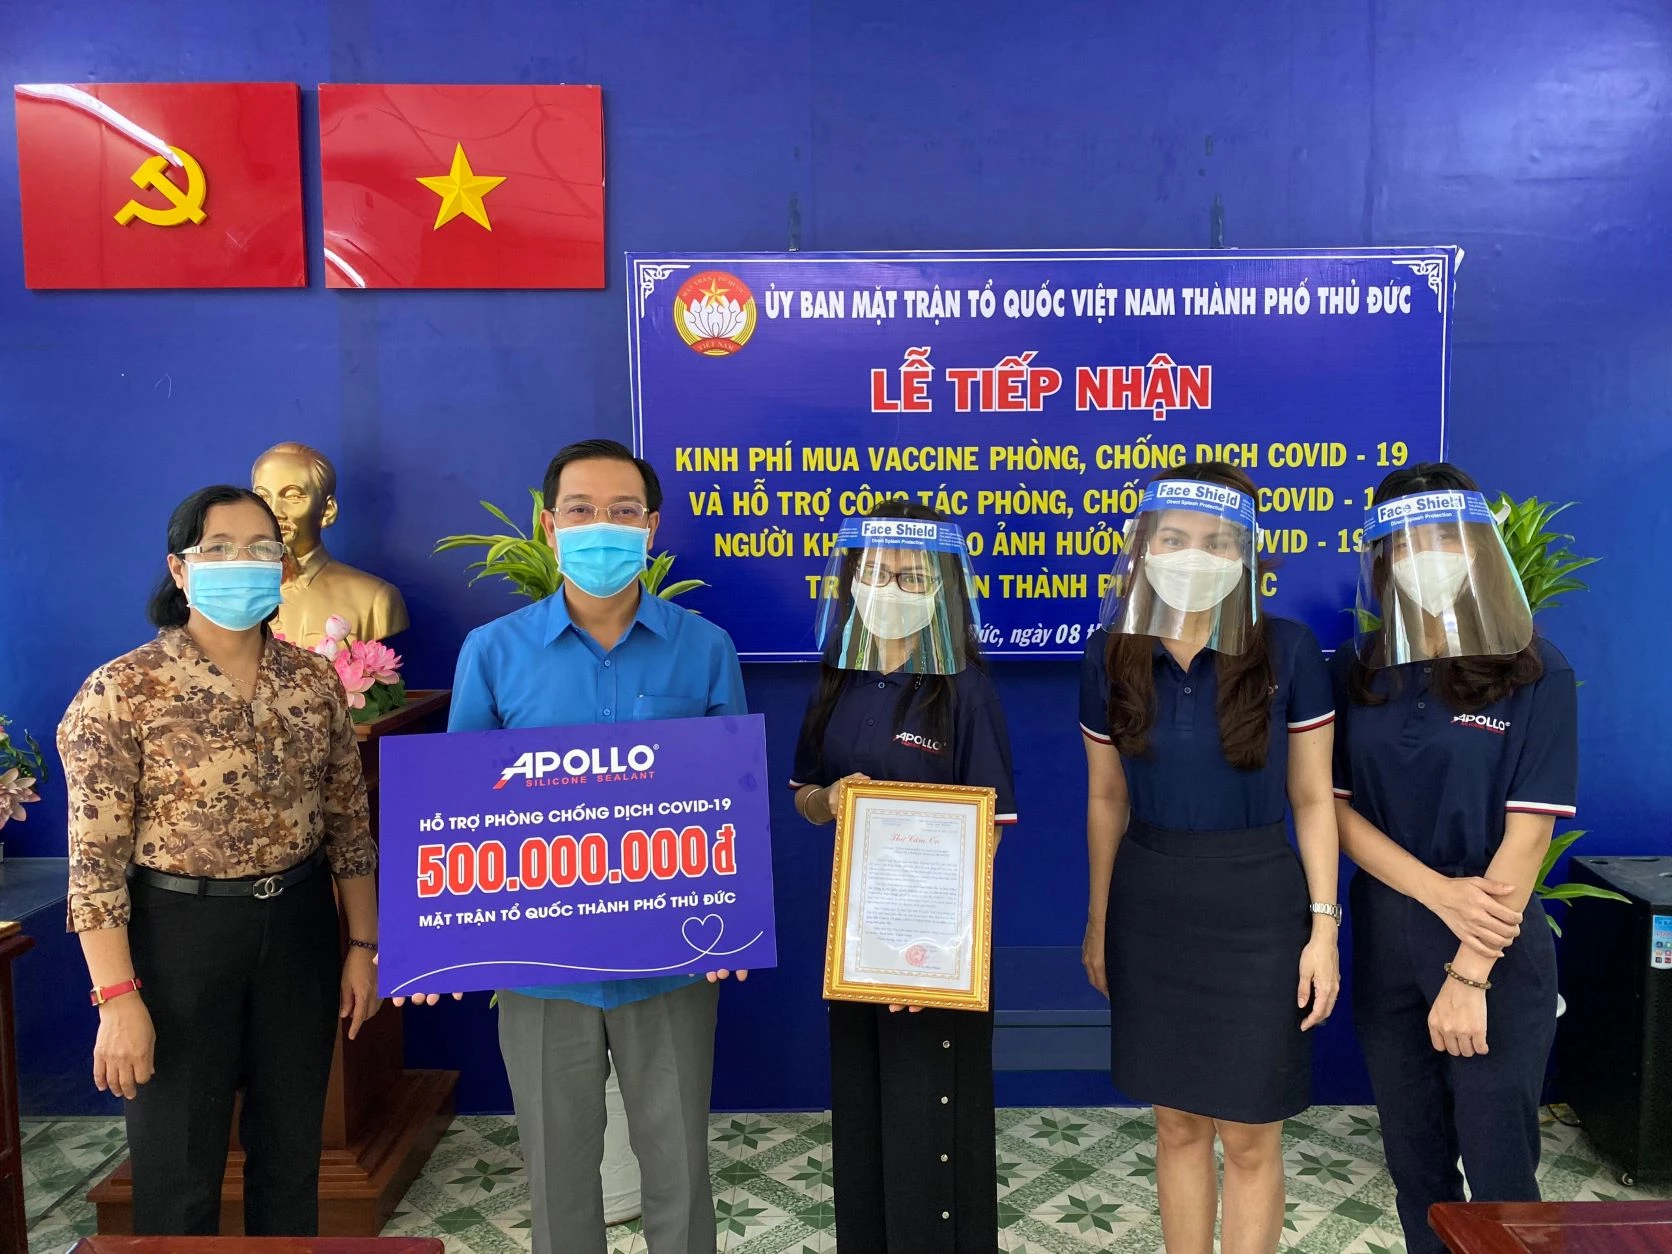 Apollo Silicone joins hands to volunteer with Ho Chi Minh City